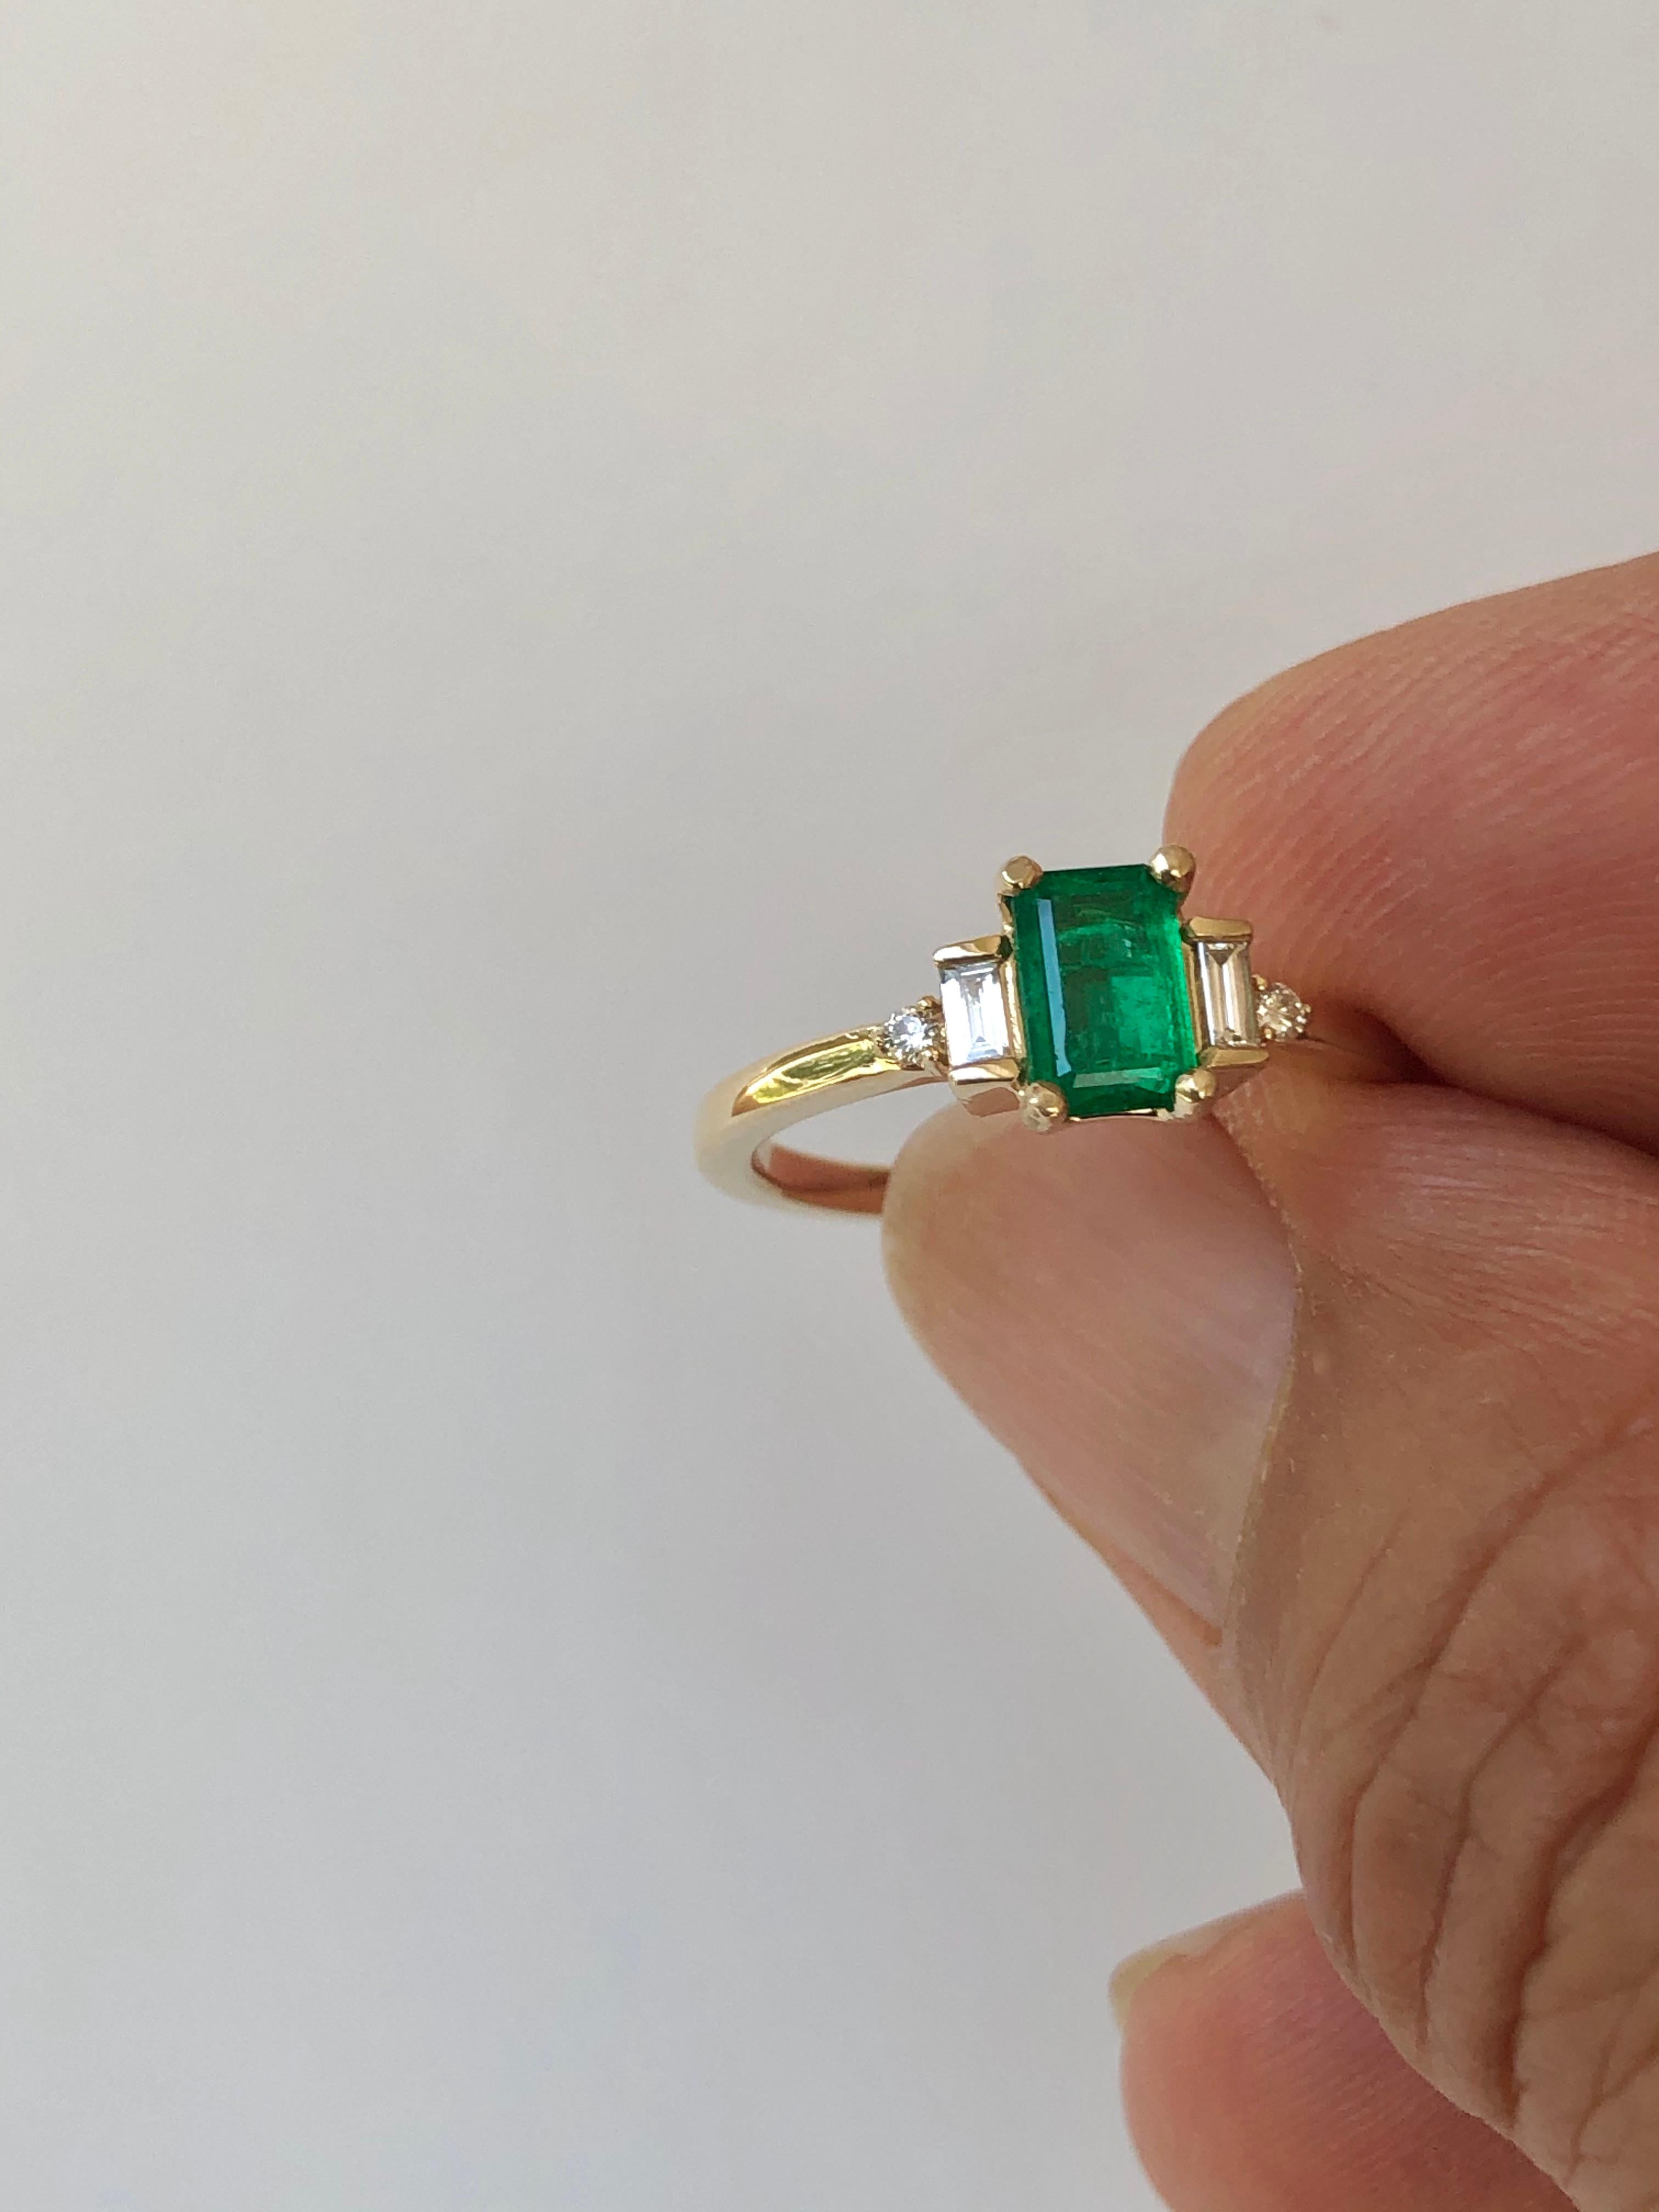 This is a Gorgeous Emerald and Diamond Engagement Ring set with a rectangular cut emerald weighing approximately .50 carats (6.3x4.1mm), within two emerald cut and round cut diamonds H/SI1 weighing approximately  .10 carats. Set in yellow gold 14K.